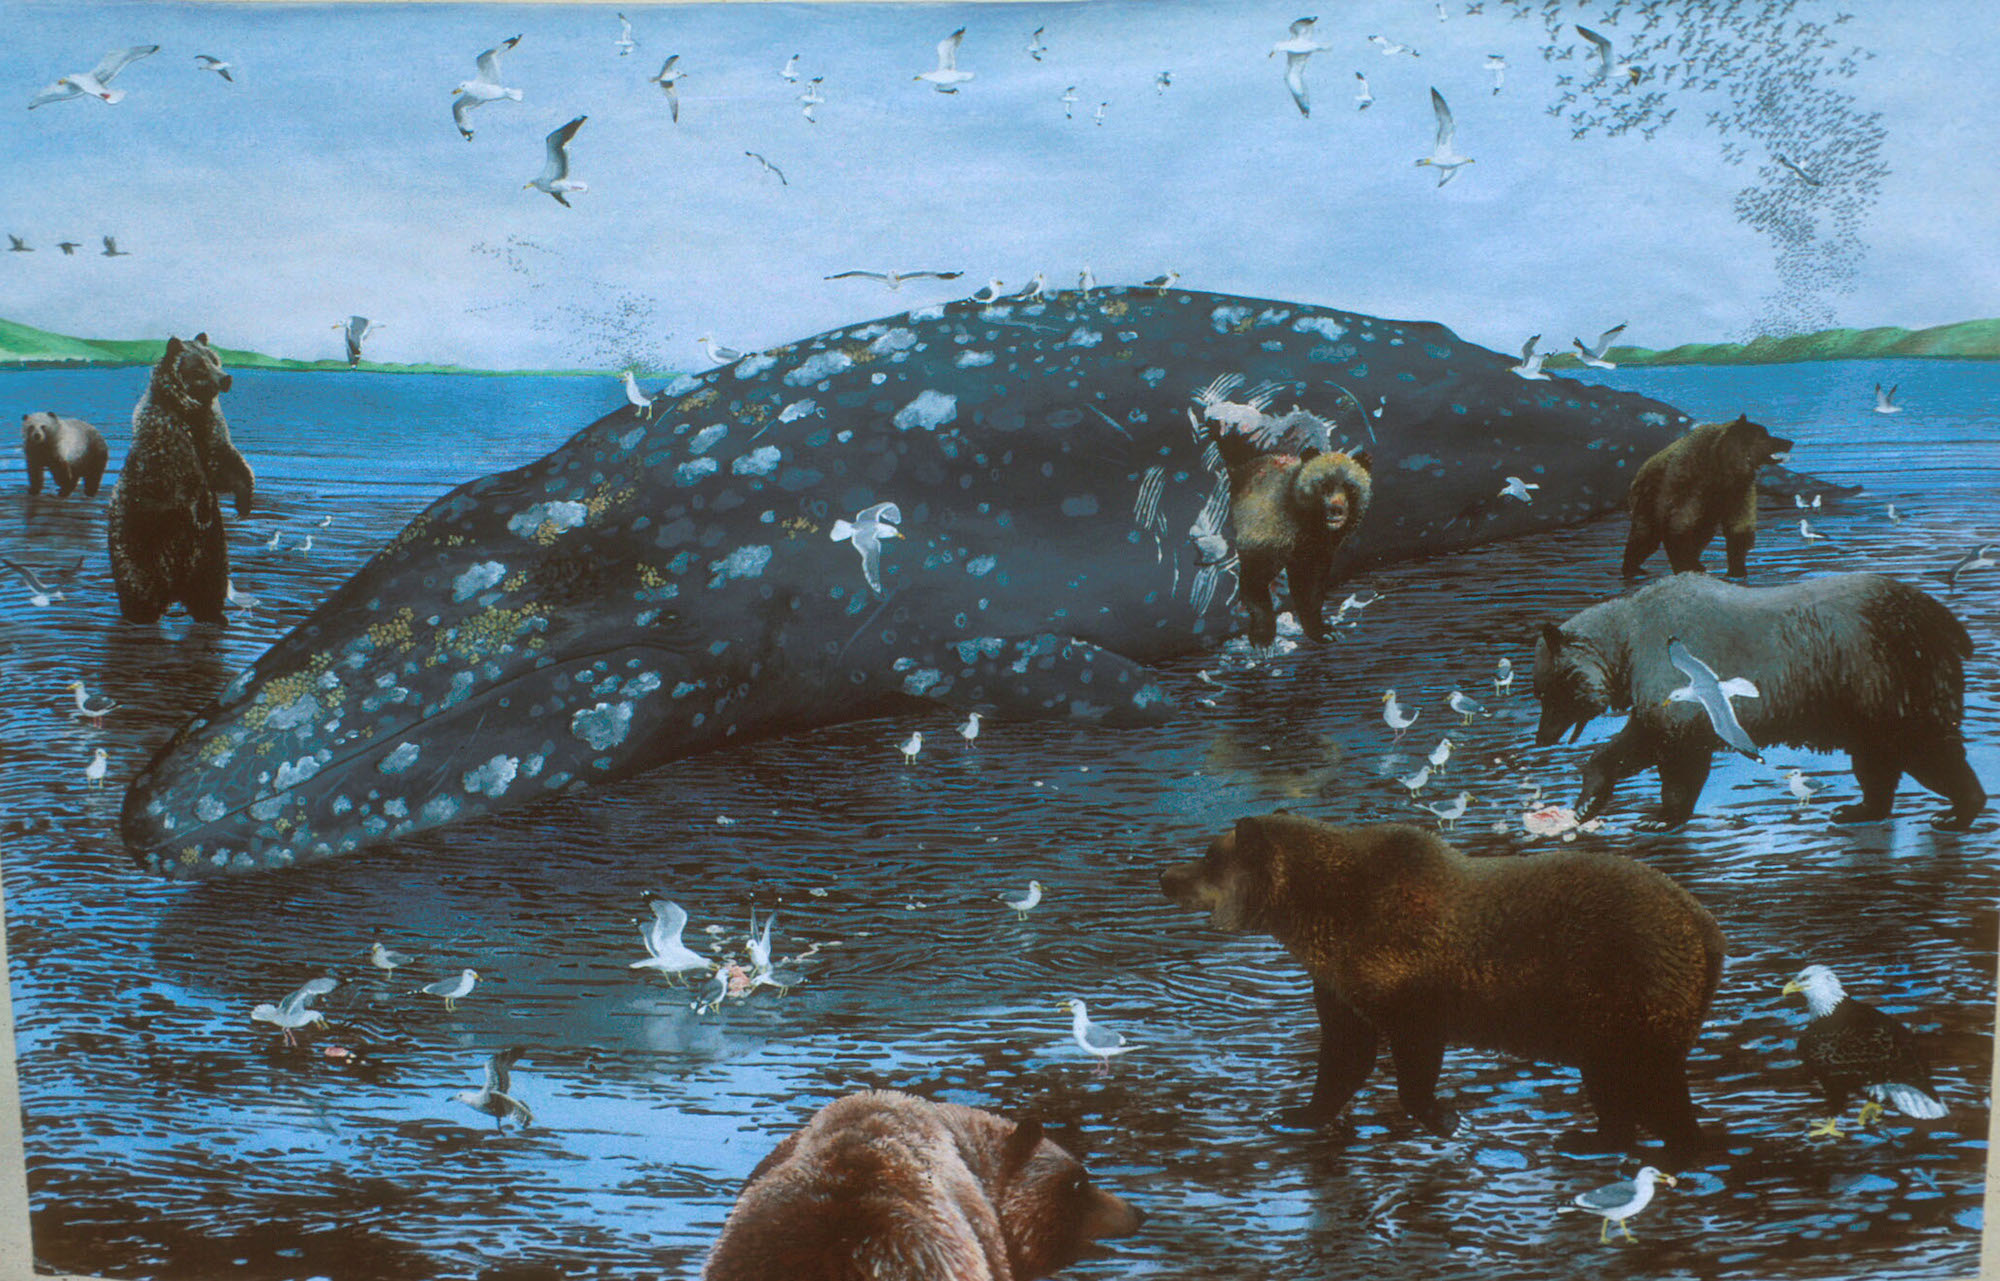 Grizzly bears feeding on a beached whale carcass, as imagined by artist Laura Cunningham.